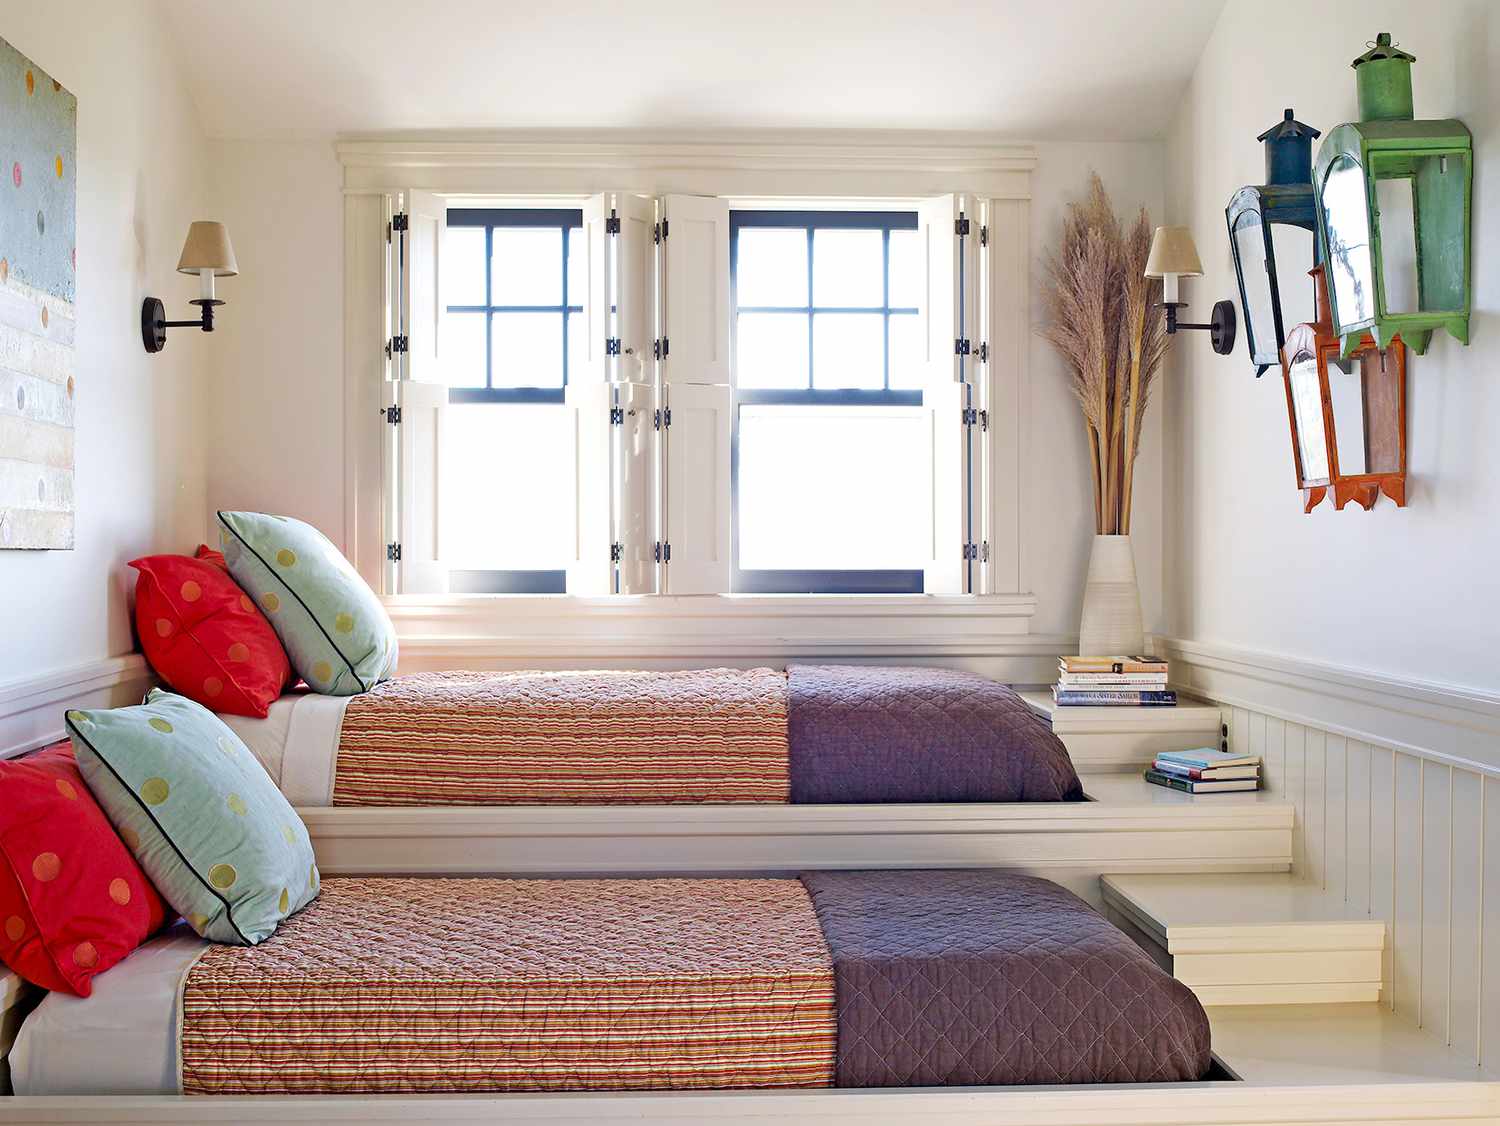 Beds For Small Rooms: How To Find The Perfect Bed For Your Small Space